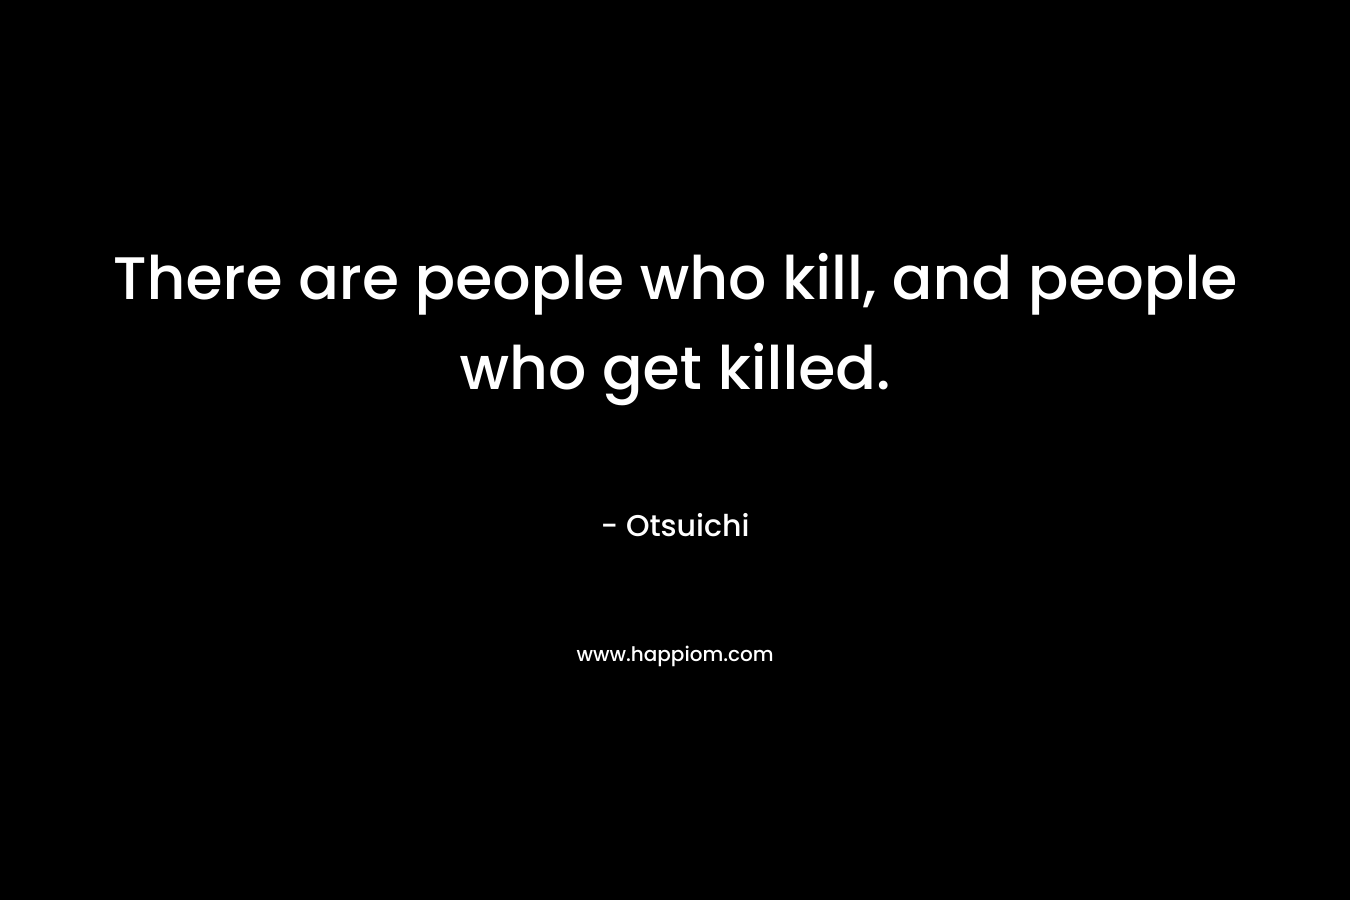 There are people who kill, and people who get killed.